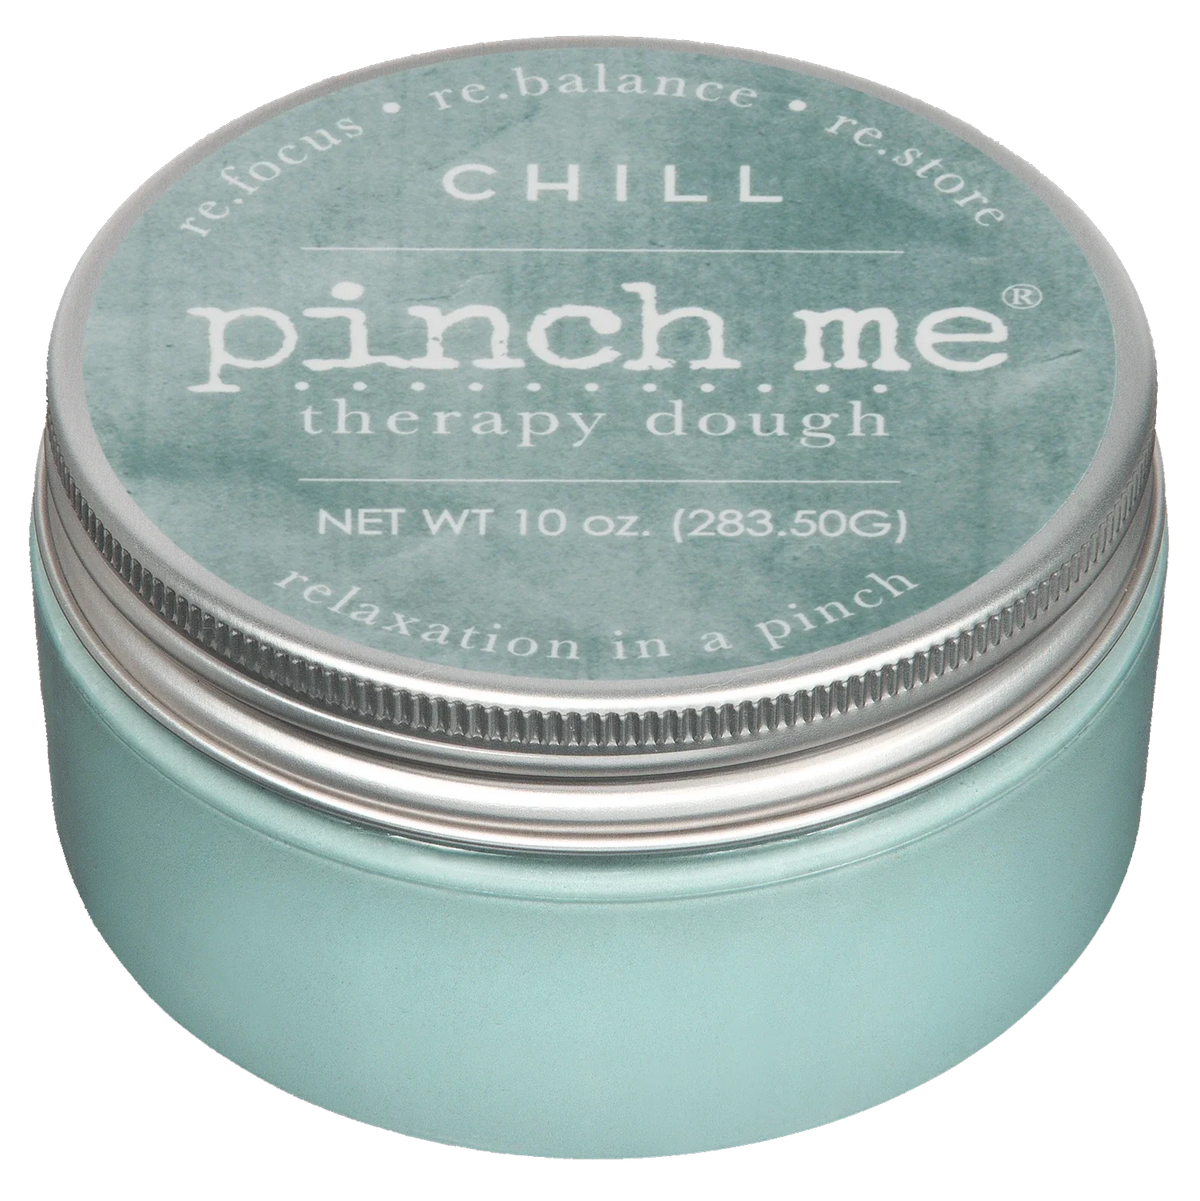 Pinch Me Therapy Dough - Chill